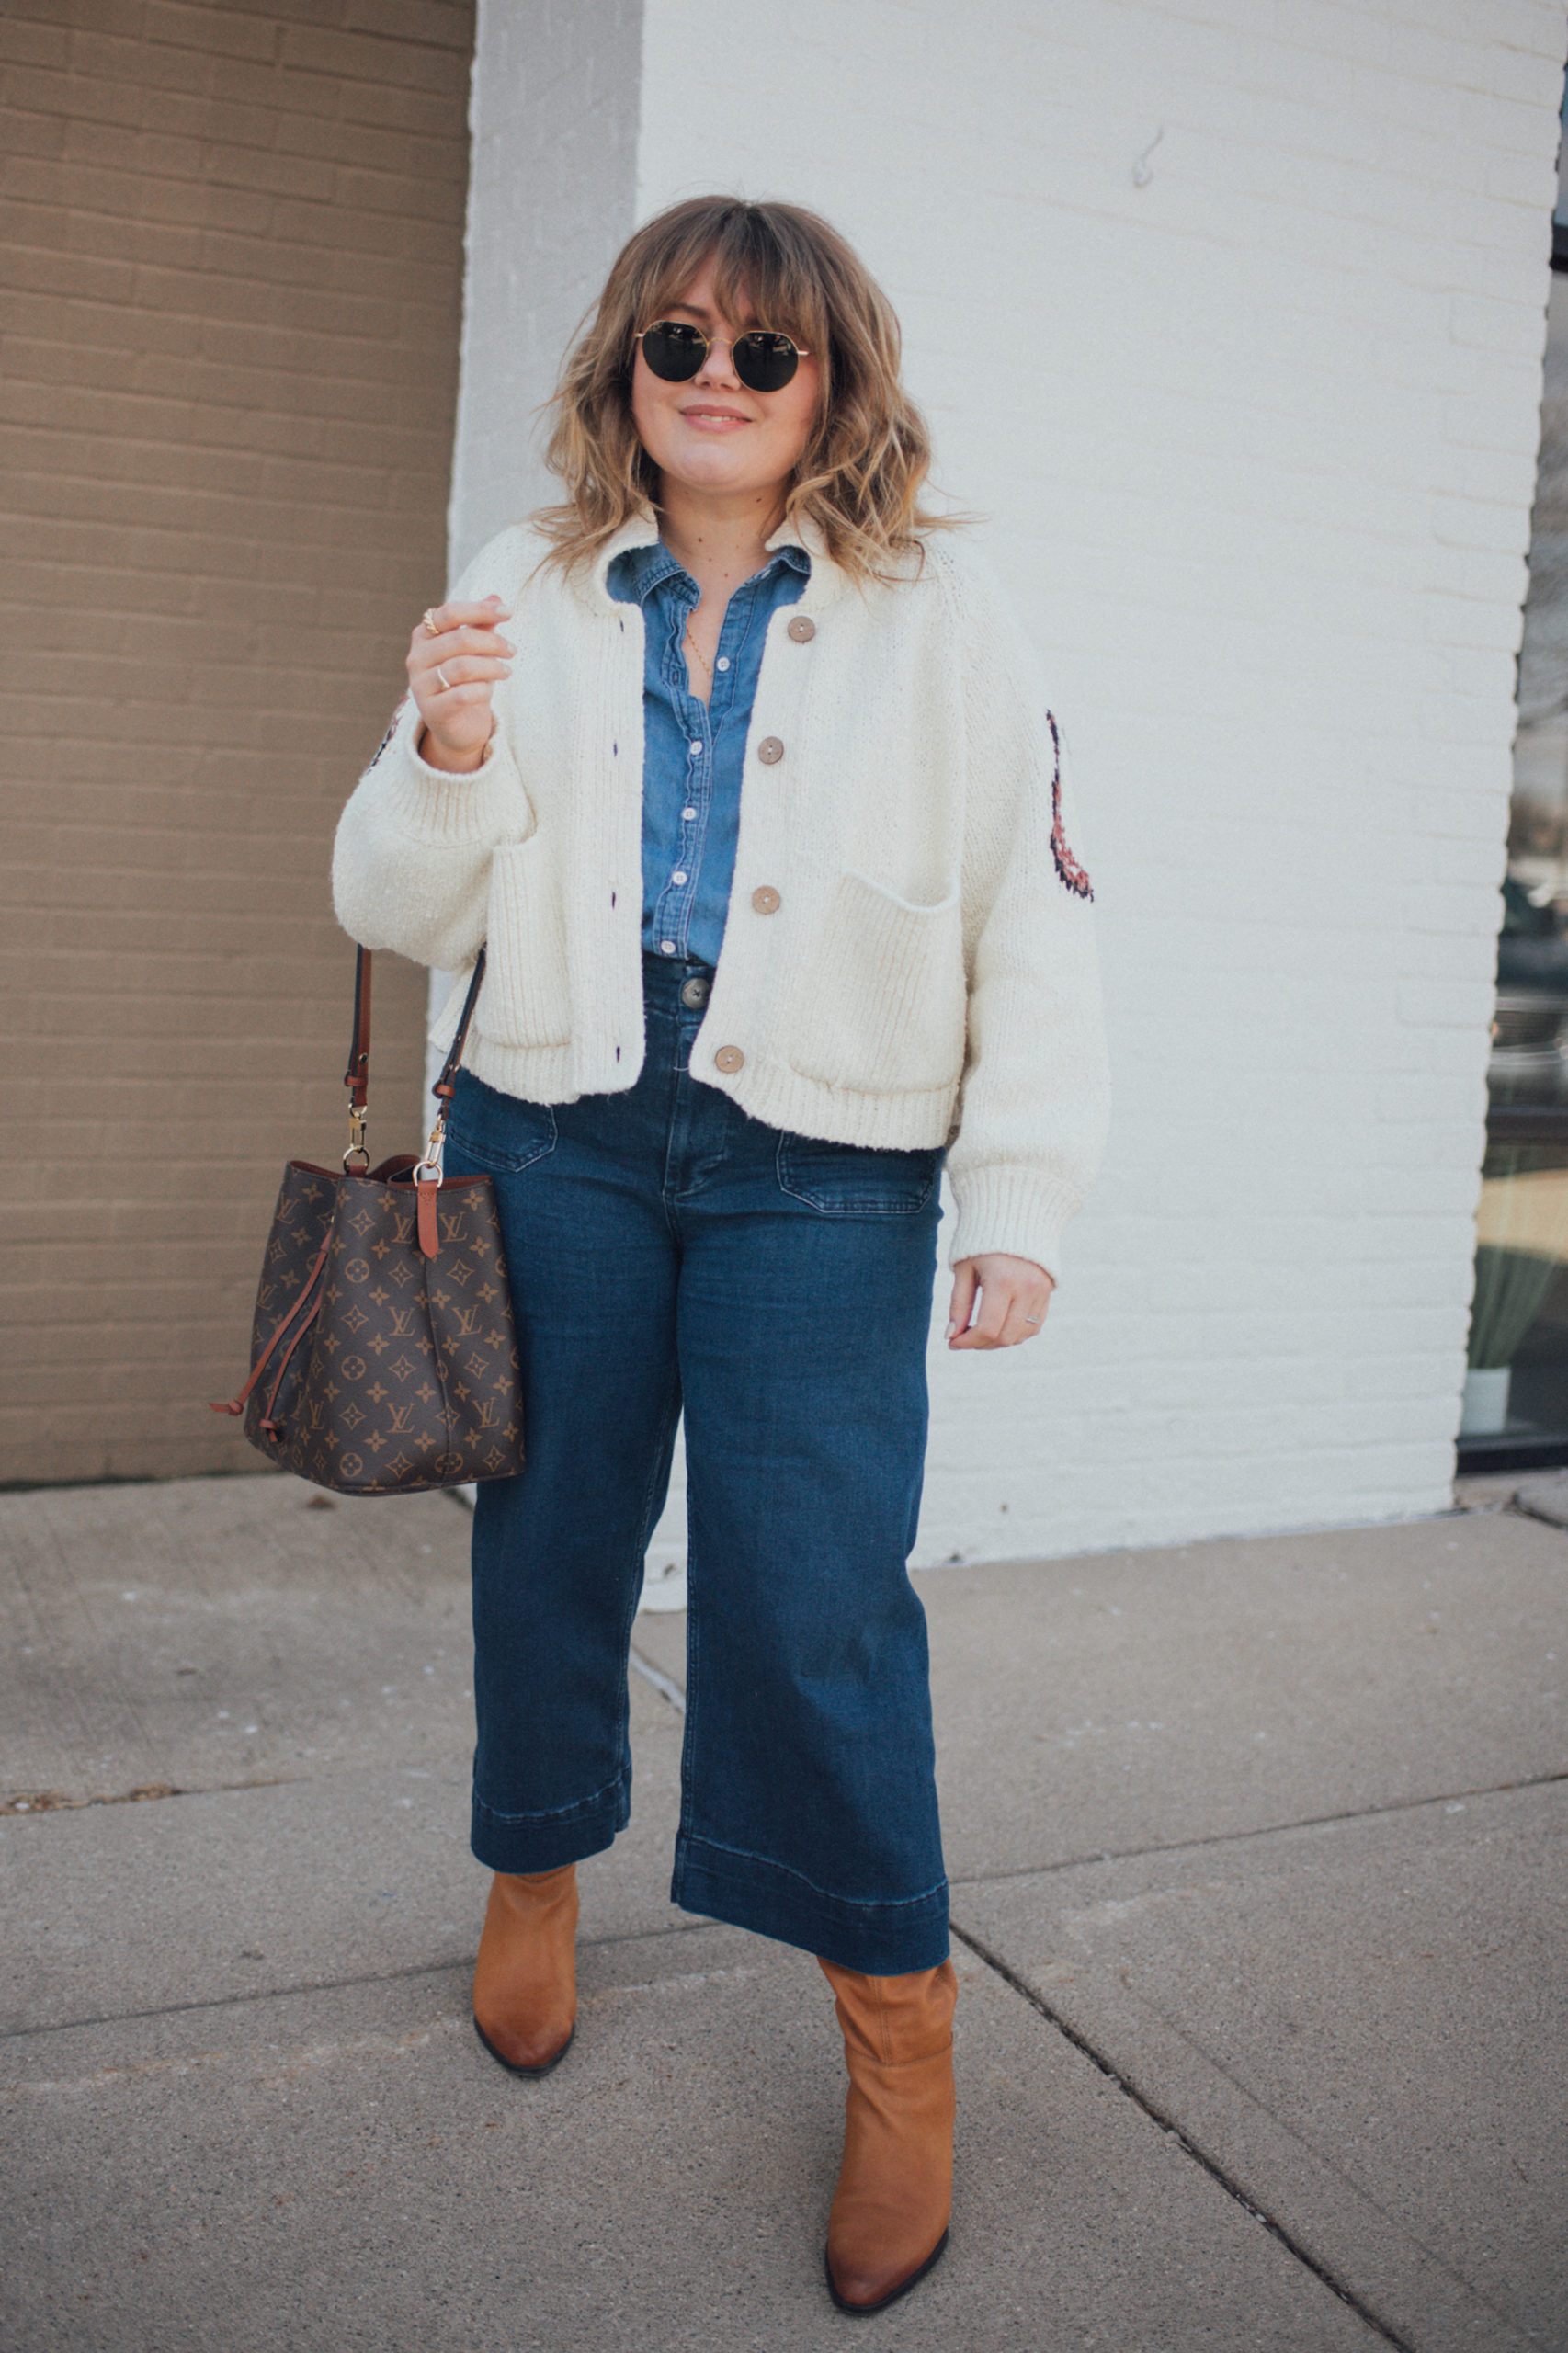 Sharing a plus size equestrian sweater look that is warm and fun for spring! I love the way this outfit wears and the boho vibe! 